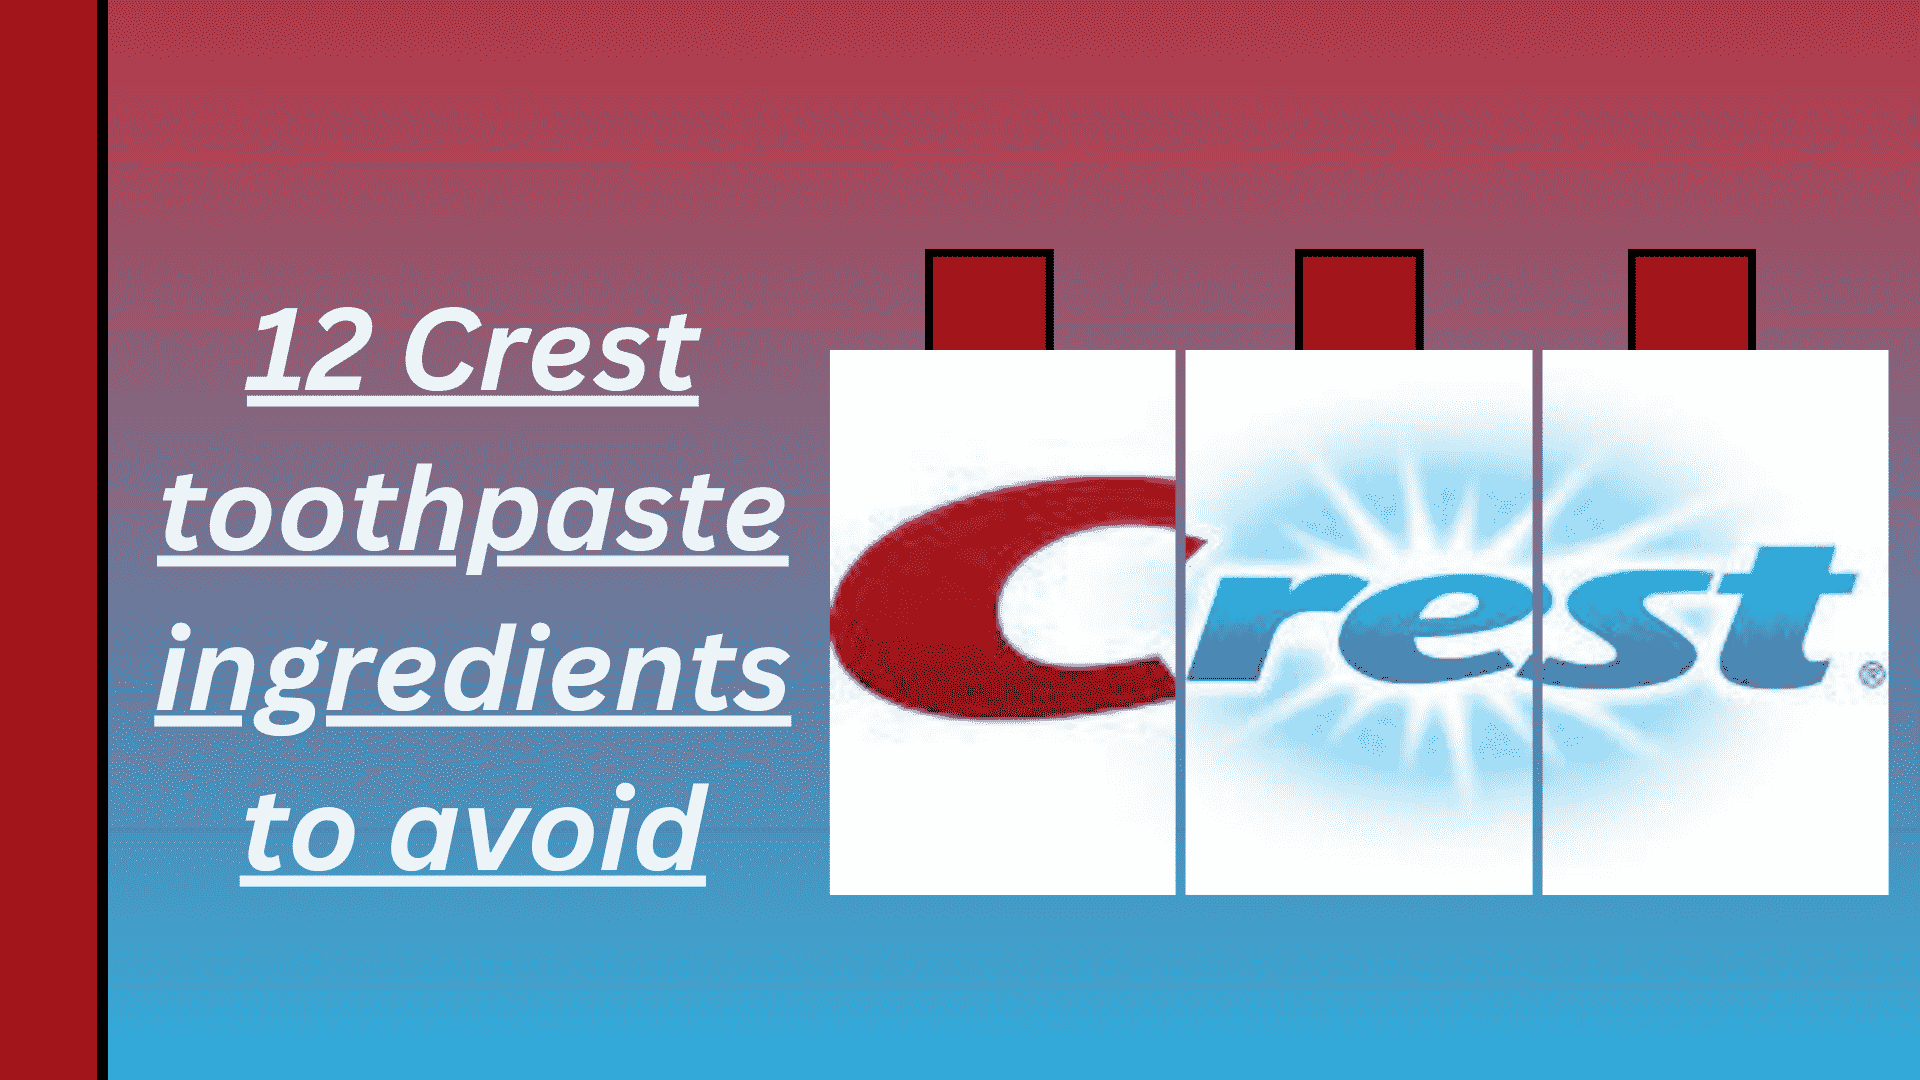 12 Crest toothpaste ingredients to avoid